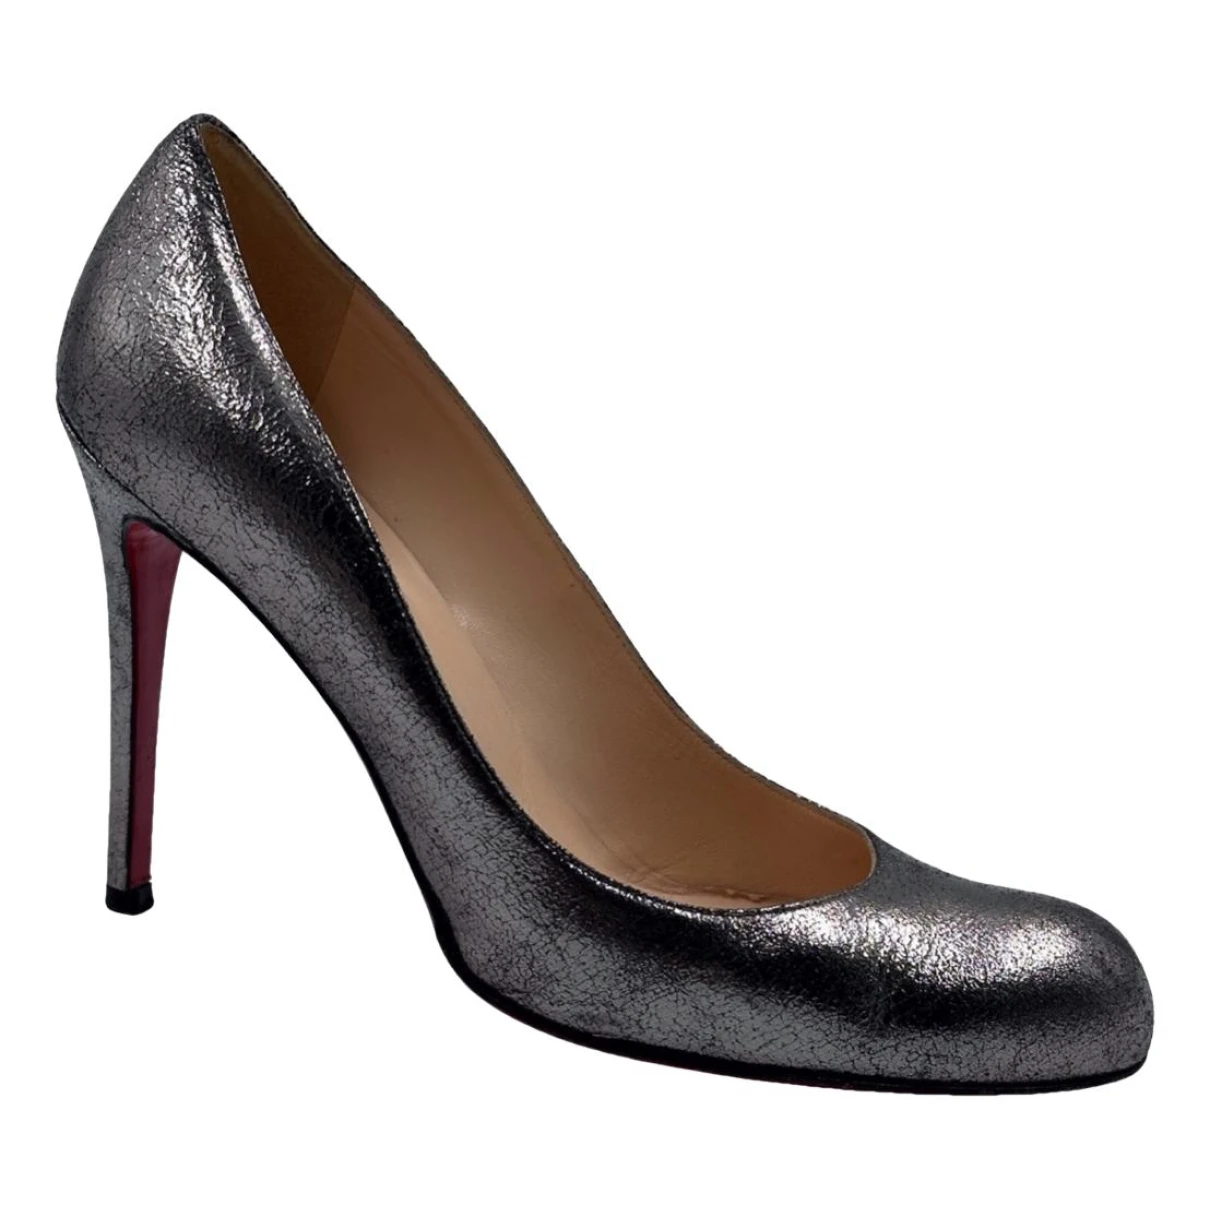 shoes Christian Louboutin heels Simple pump for Female Leather 40 EU. Used condition